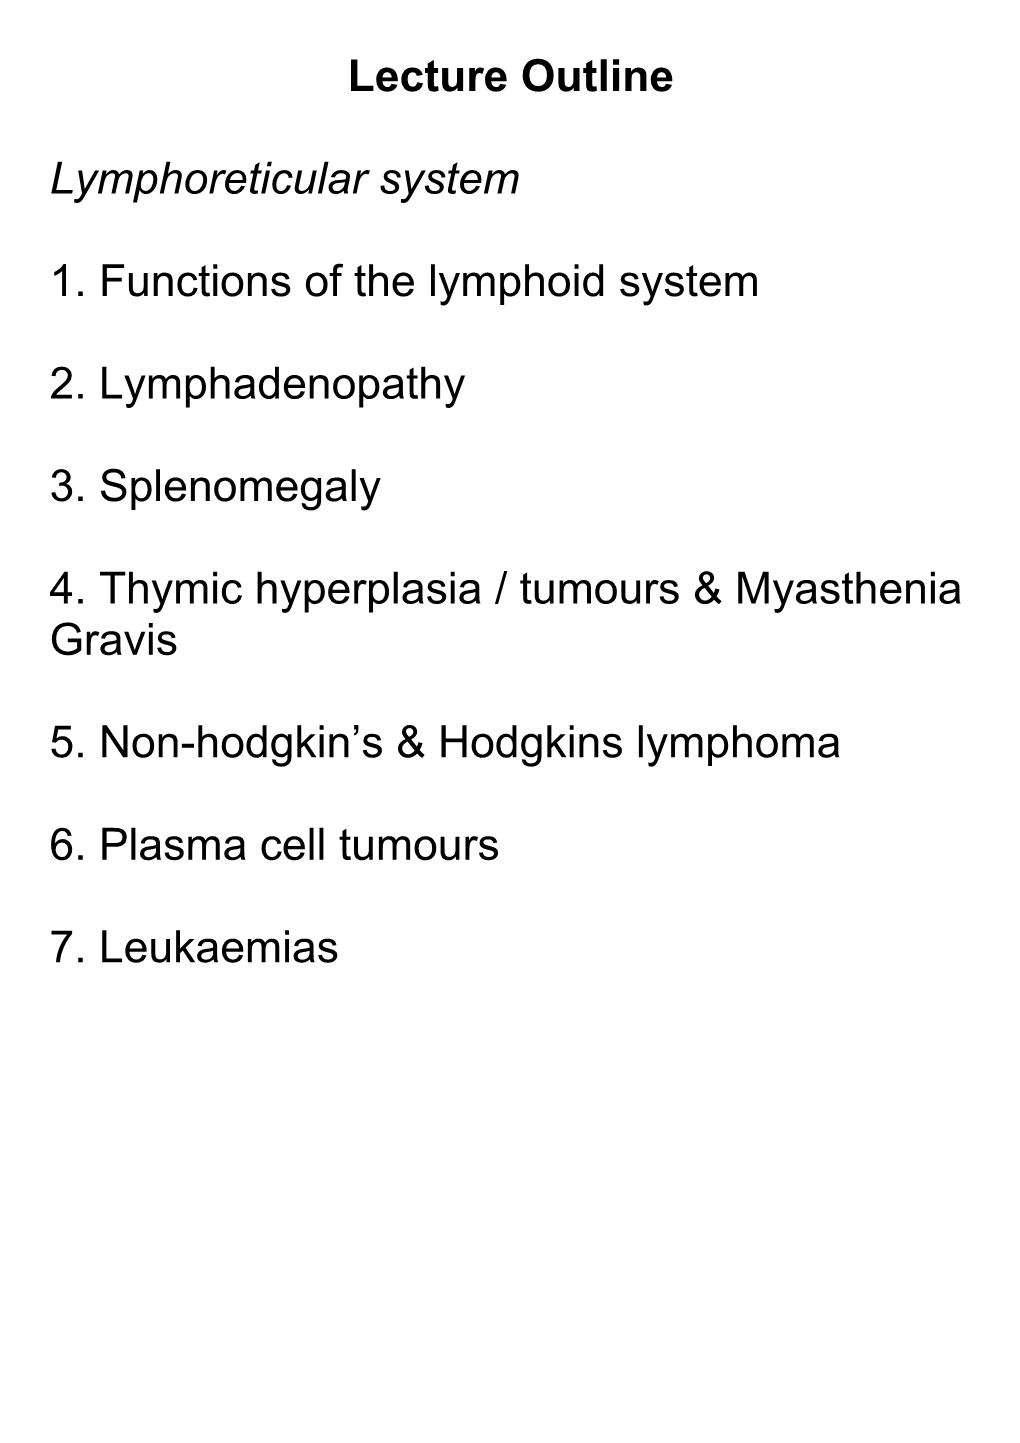 1. Functions of the Lymphoid System